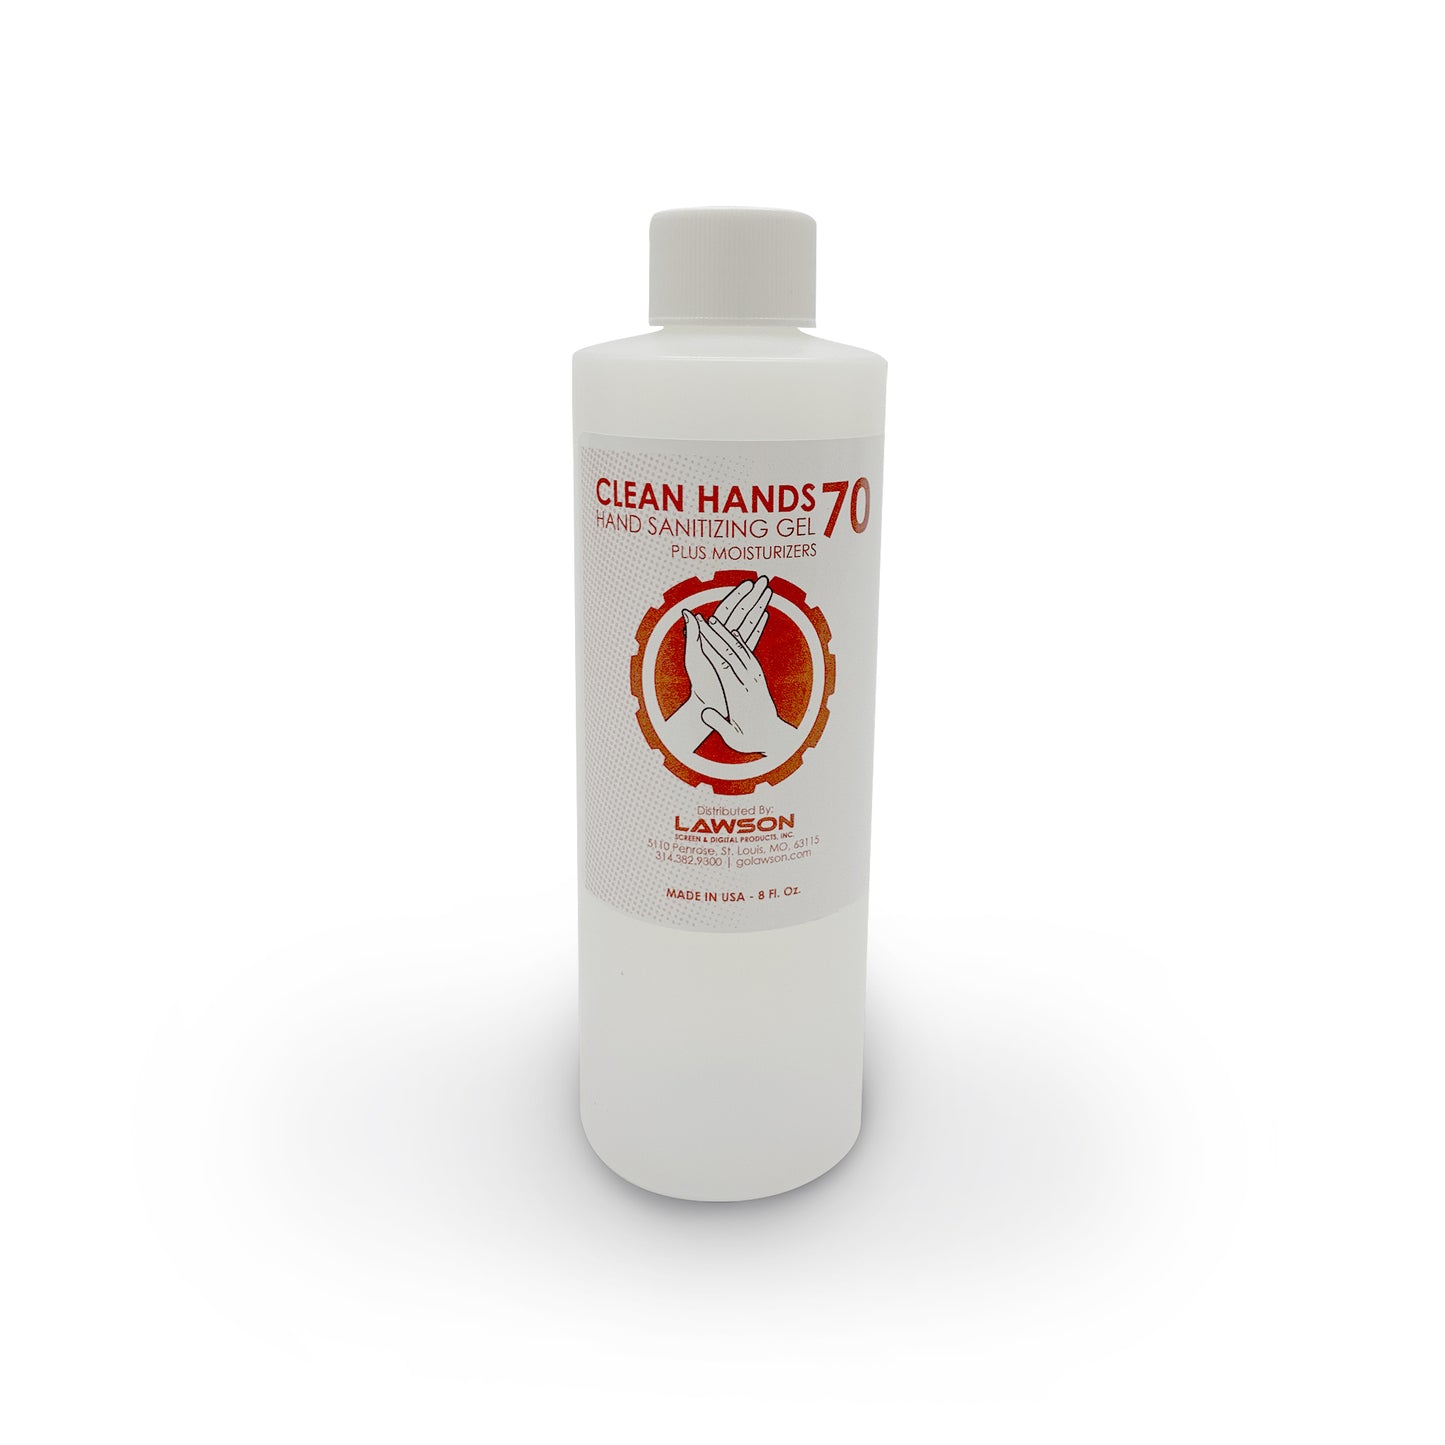 Clean Hands 70 Hand Sanitizer-Screen Print Cleaning-Lawson Screen & Digital Products Lawson Screen & Digital Products dtf printer screen printing direct to fabric equipment machine printers equipment dtg printer screen printing direct to garment equipment machine printers